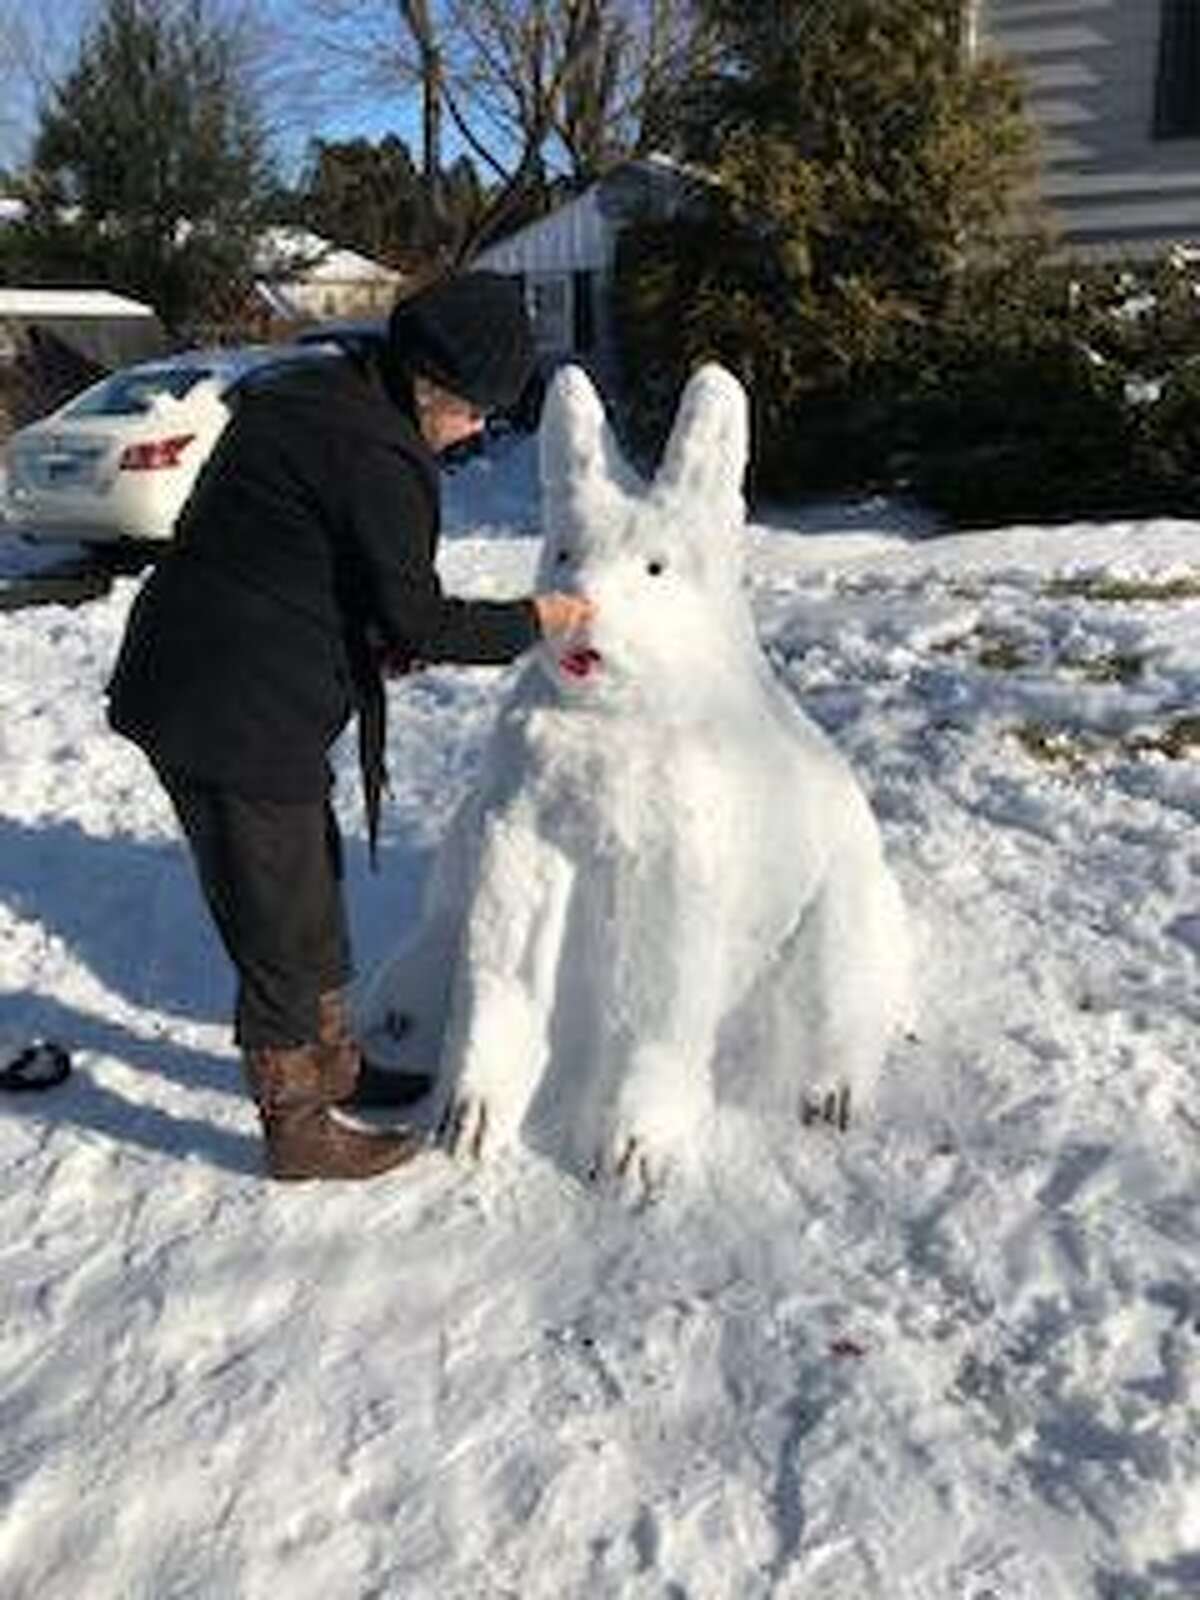 Inspired by their “grand dog,” the Hansons used the newly fallen snow to create this snow dog Sunday, Jan. 19, at their Toas Street property. Darlene Hanson puts the finishing touches on the creation, which is modeled after Ganon, their French bulldog grand dog.